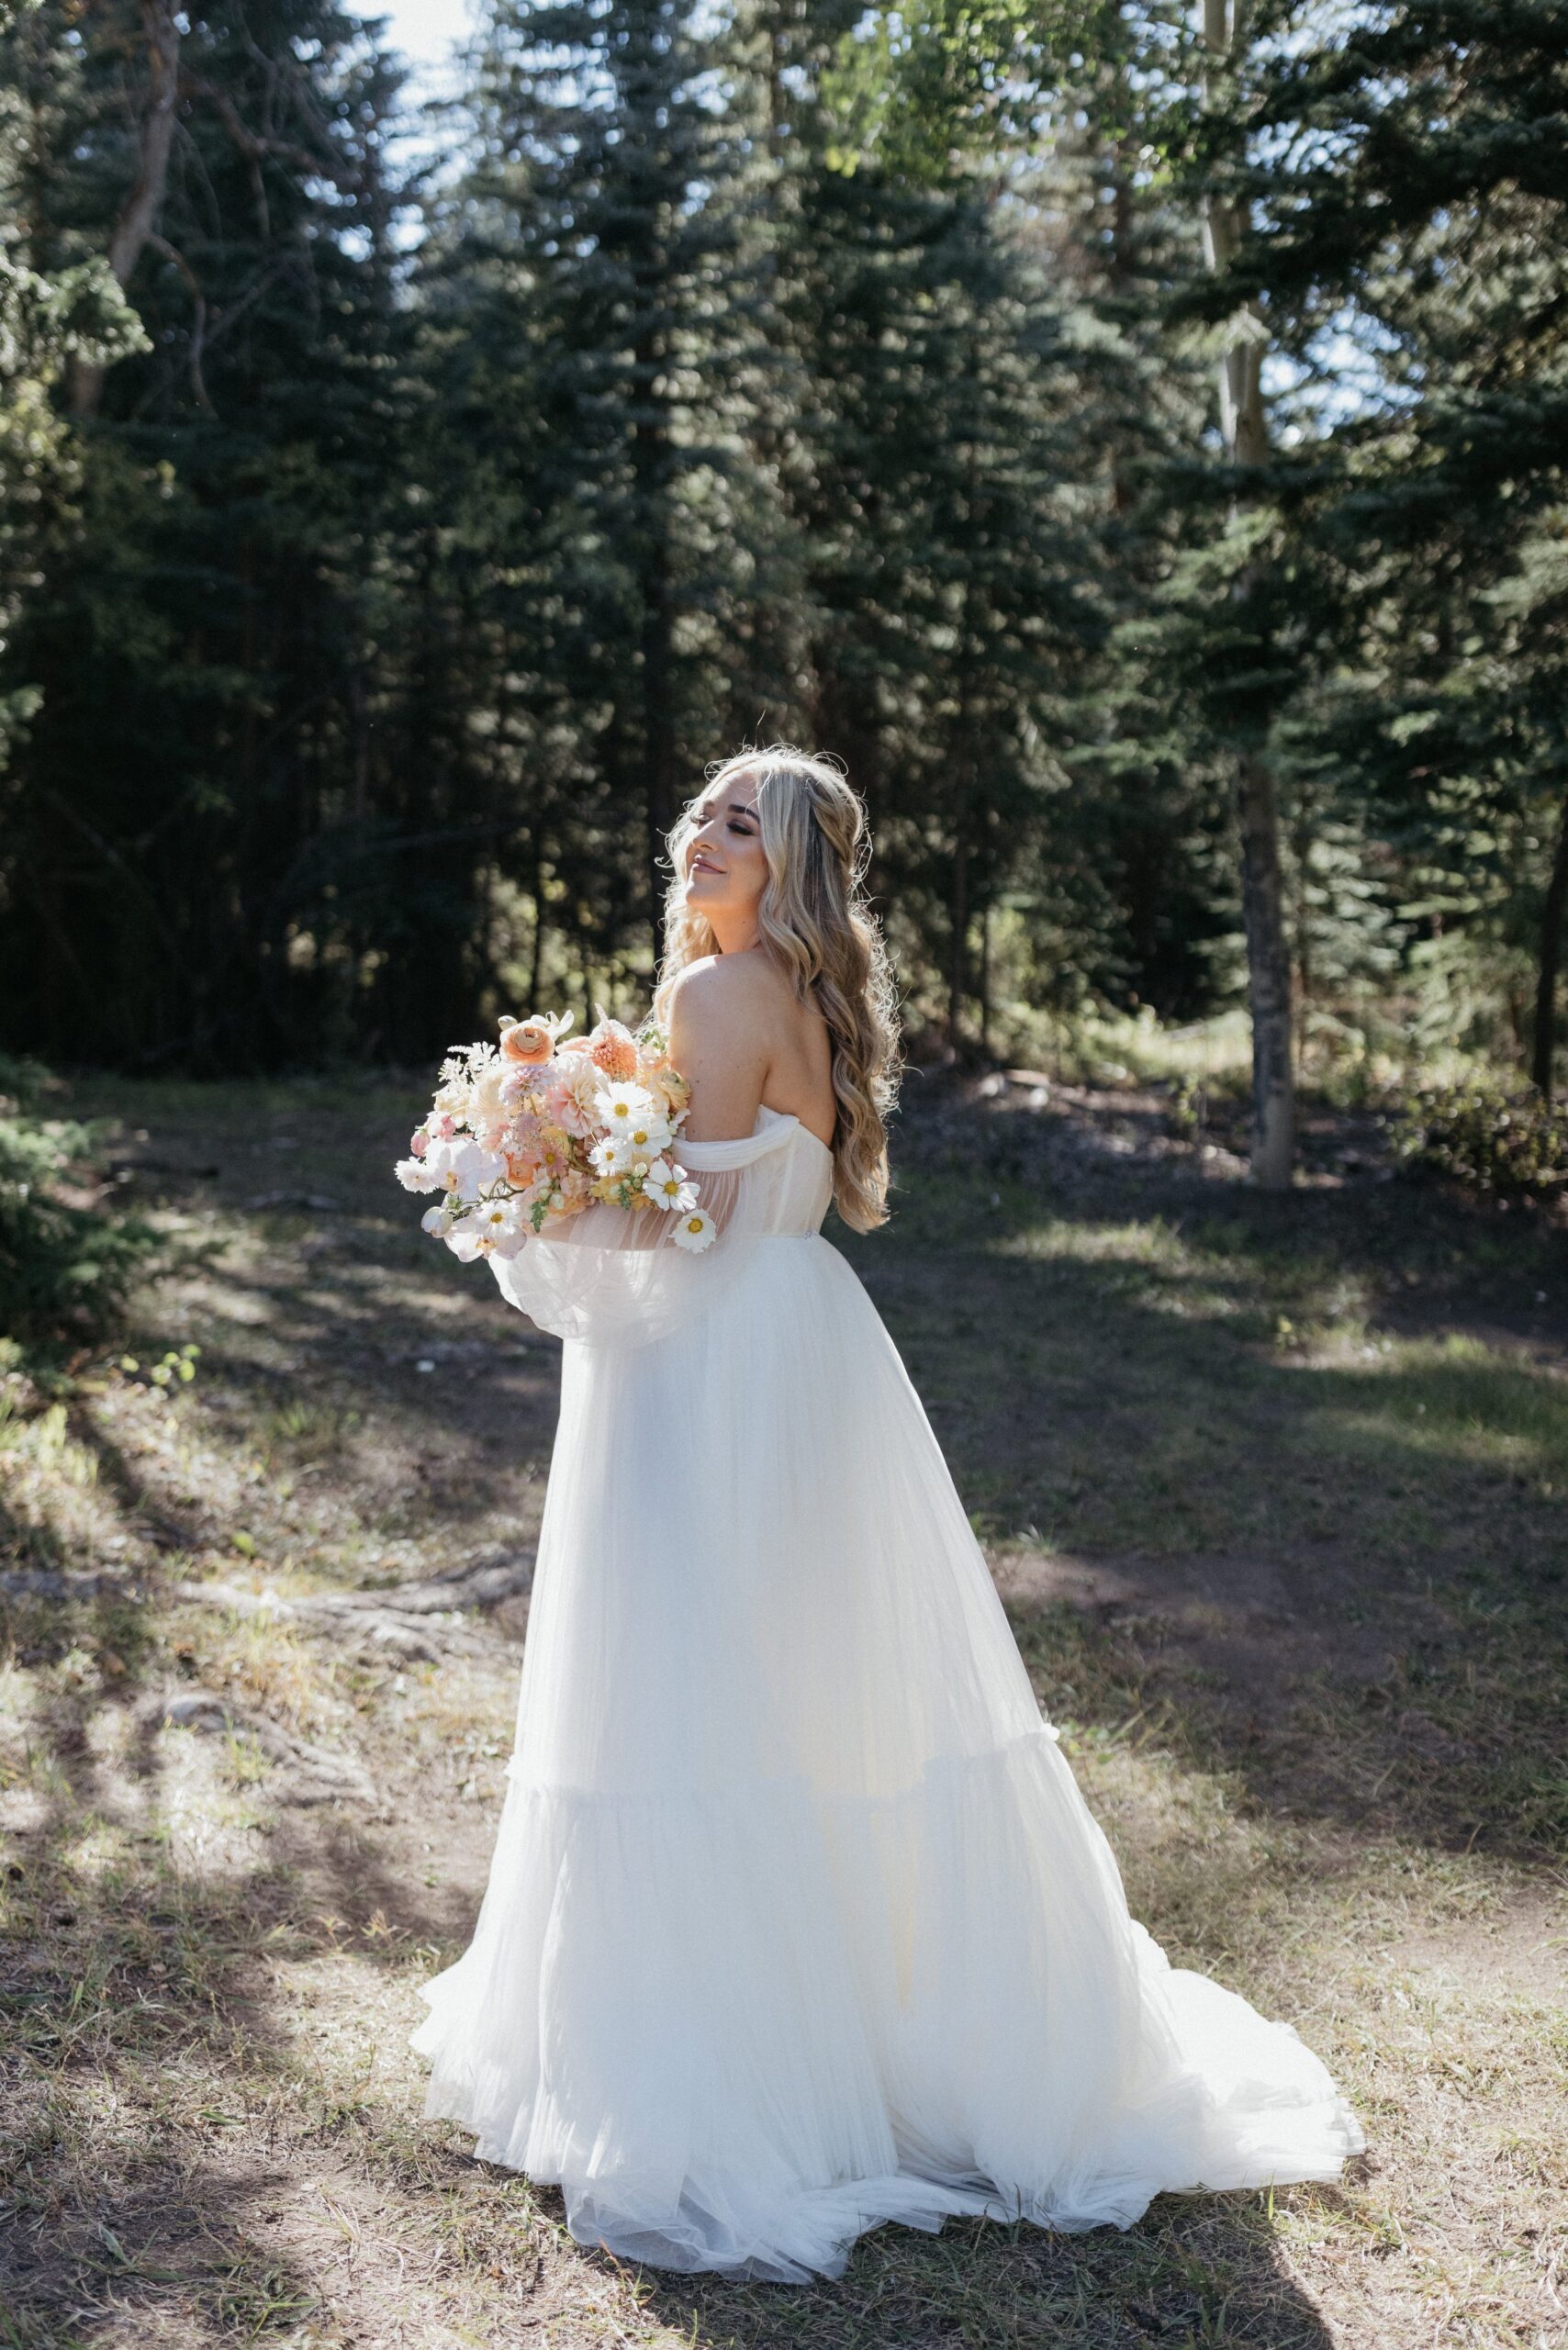 Gracie & Tommy’s Colorado Wedding and Colorful Wedding Palette